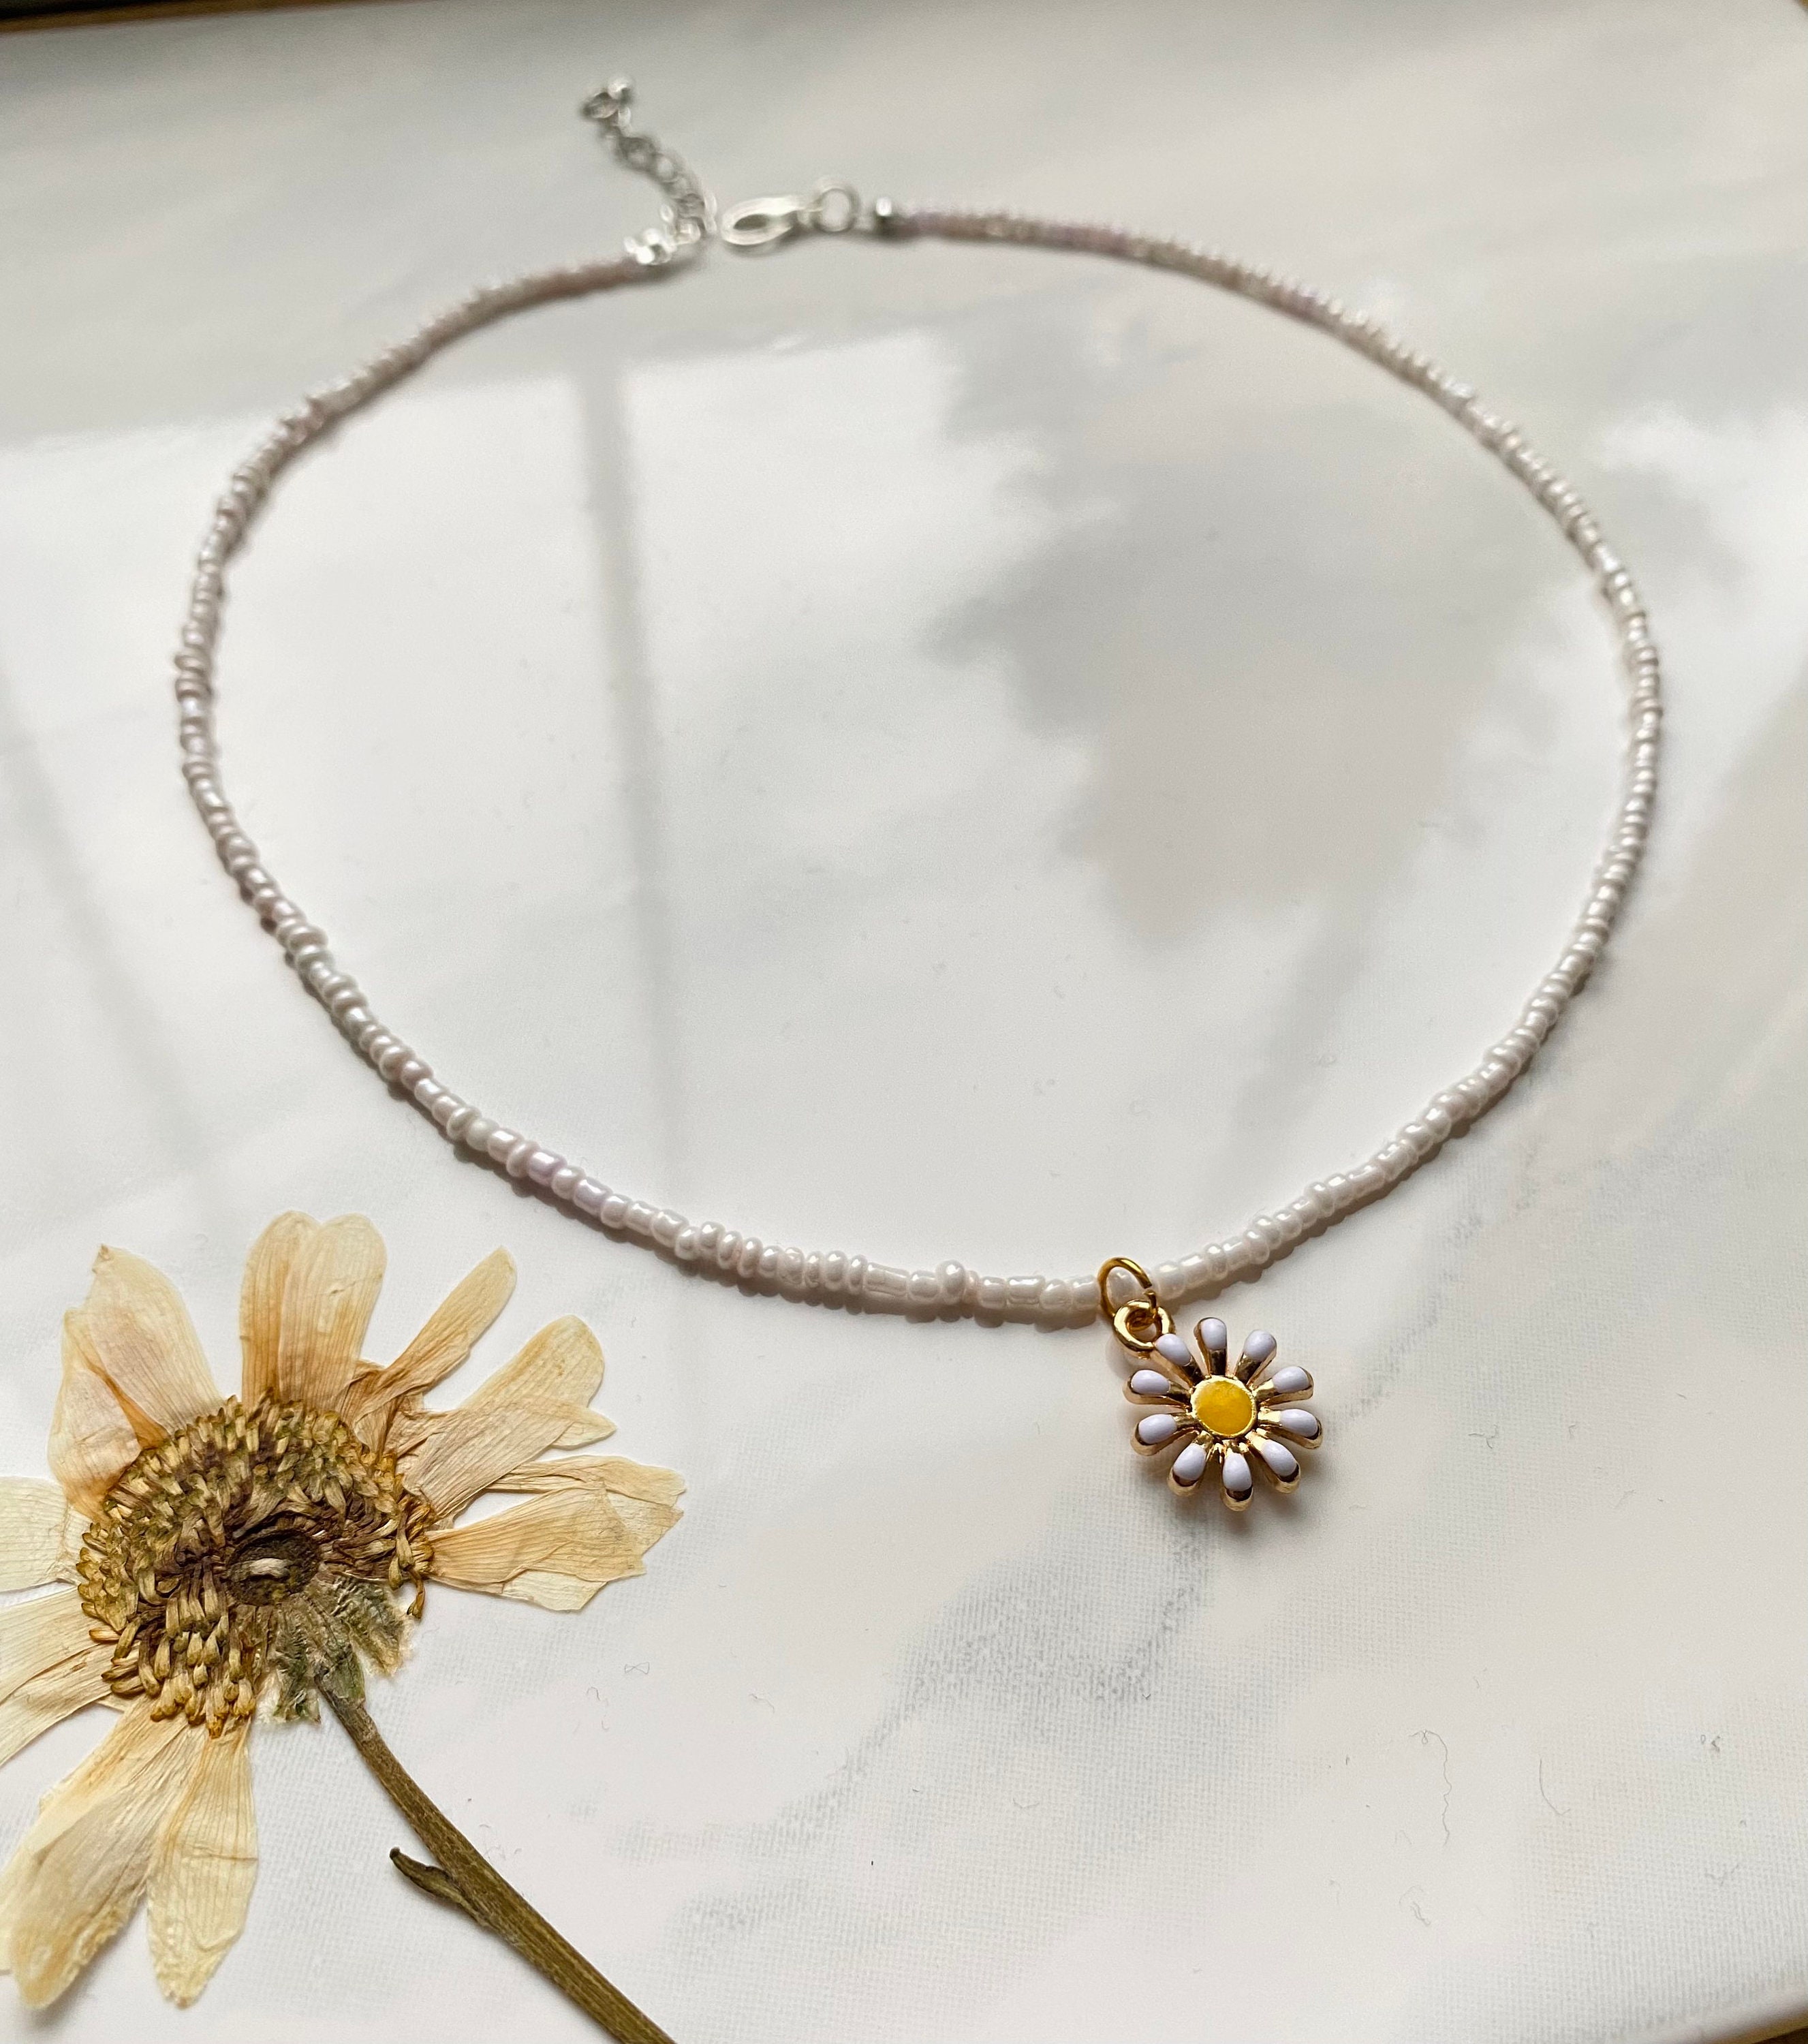 HOW TO MAKE A FLOWER CHOKER NECKLACE ✿ *VIRAL fashion trend